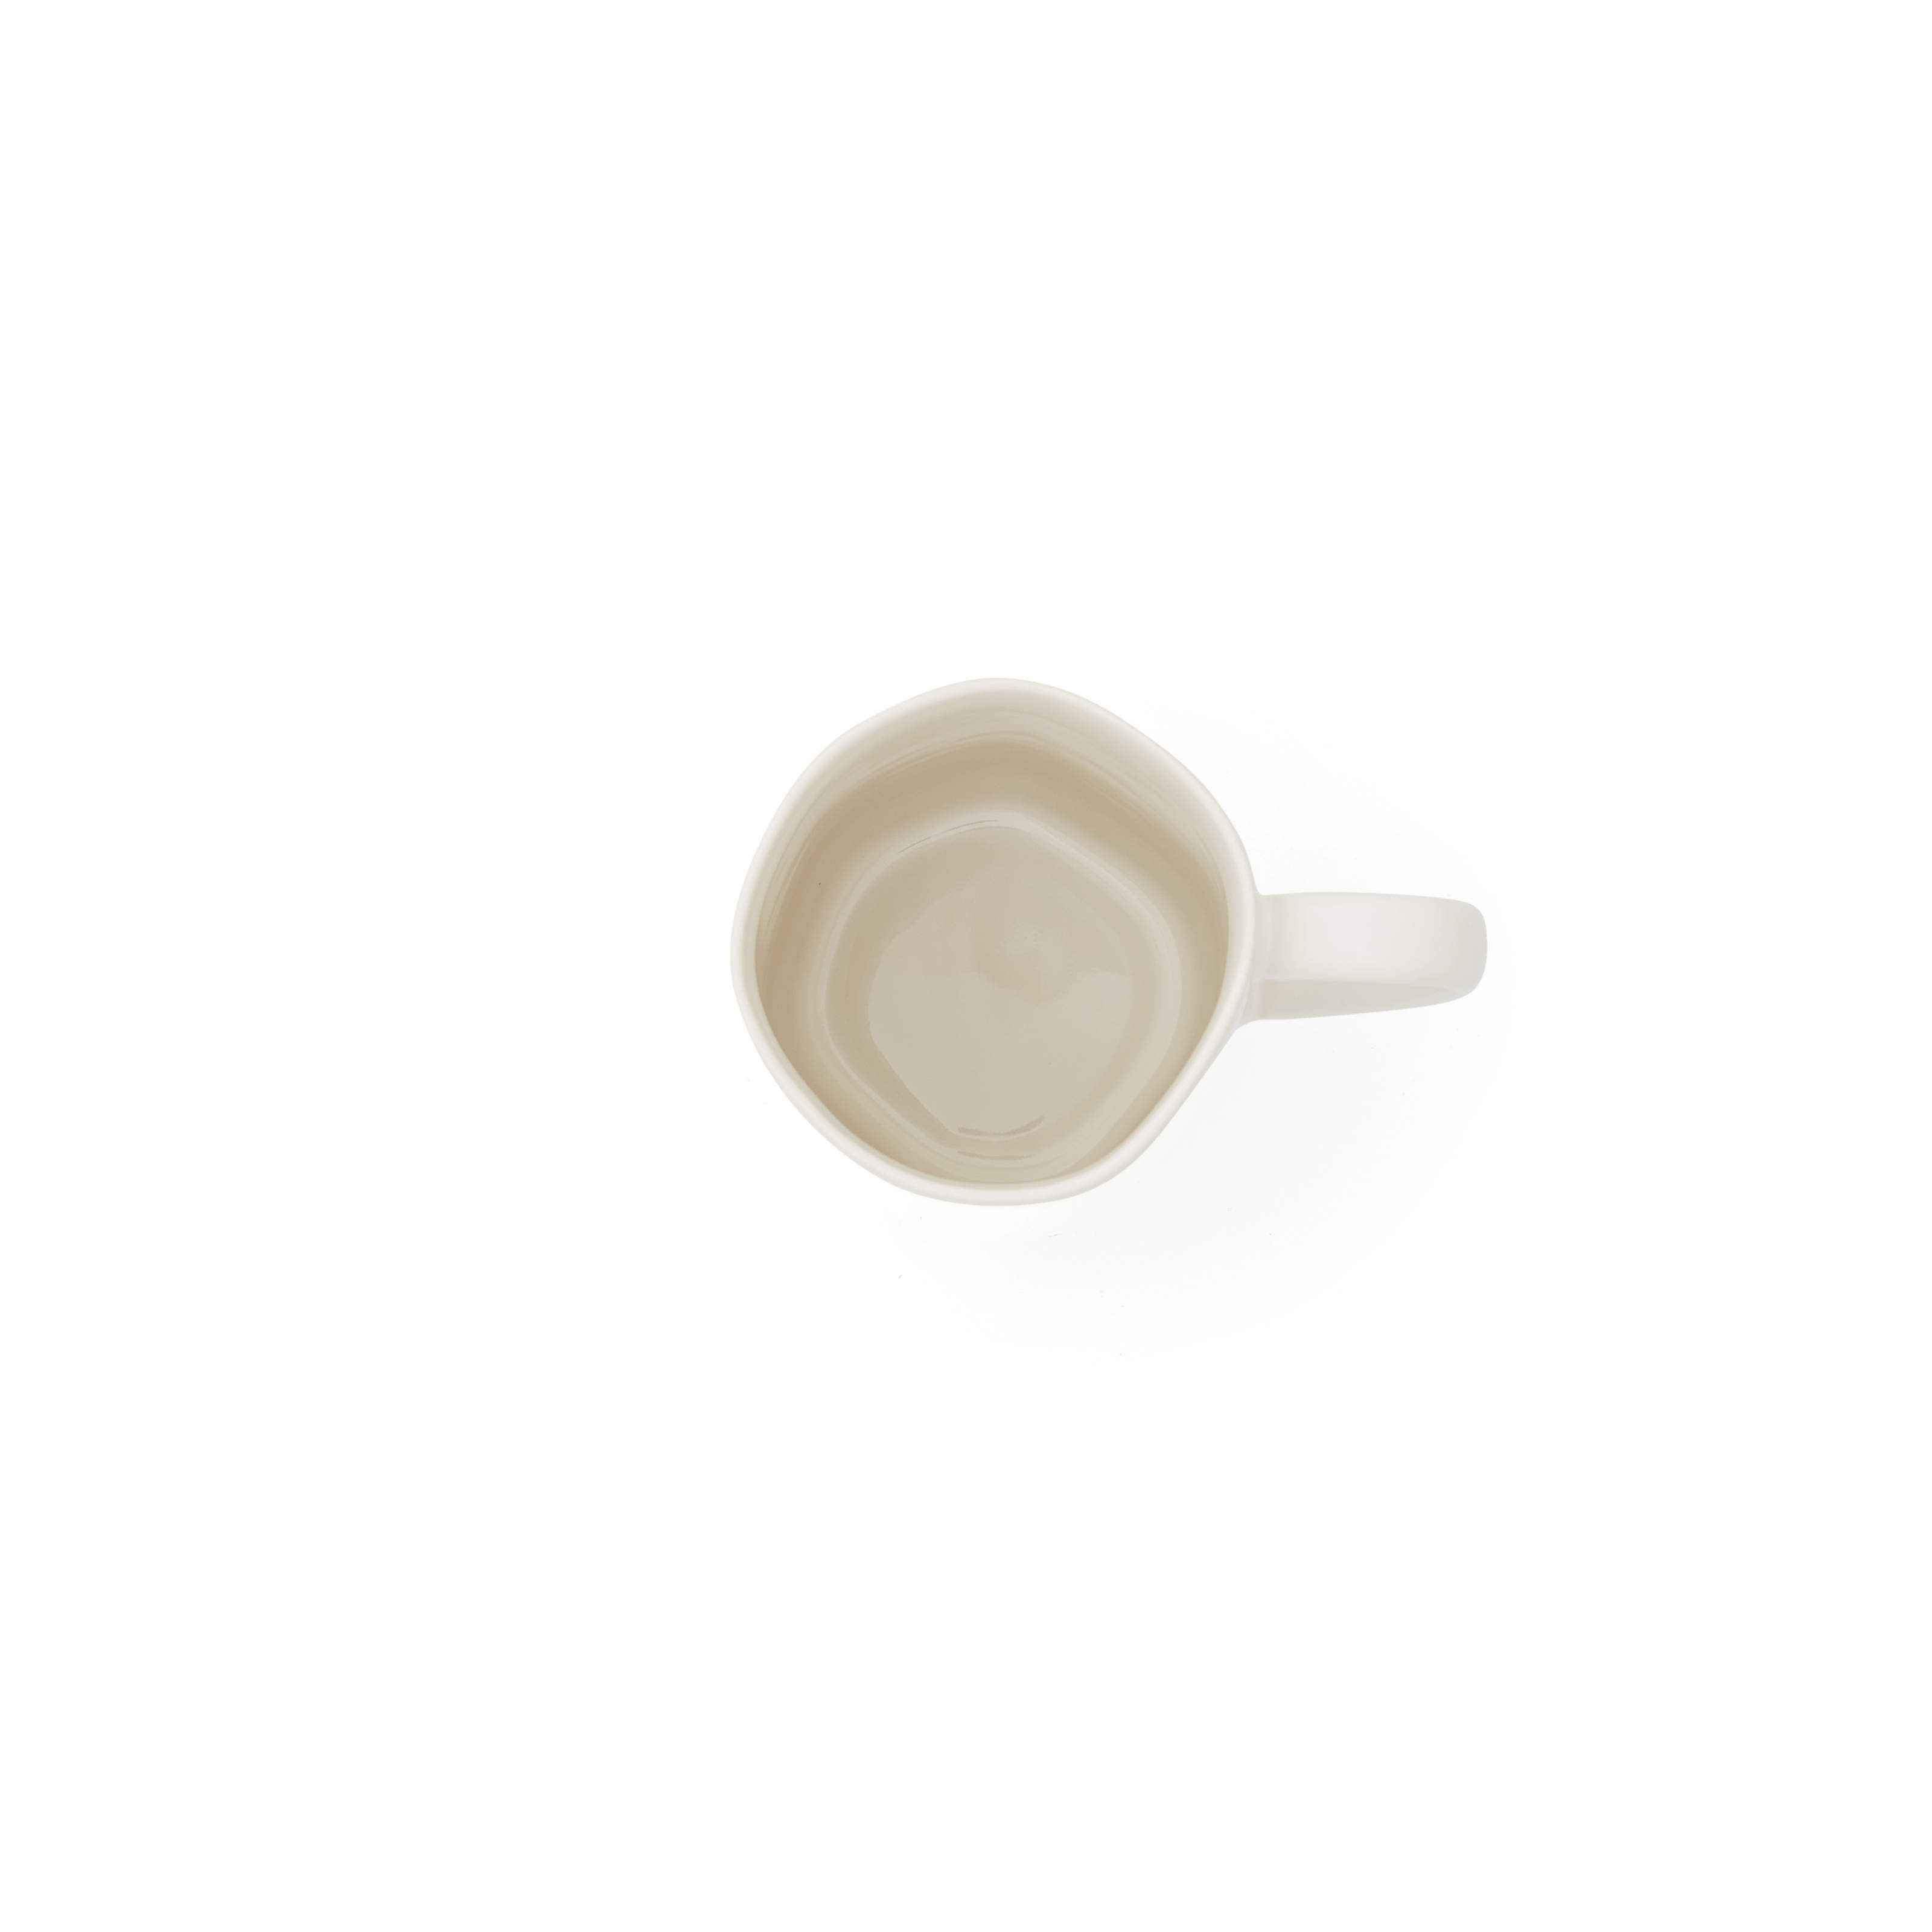 Sophie Conran Arbor 14 Ounce Mug- Creamy White image number null